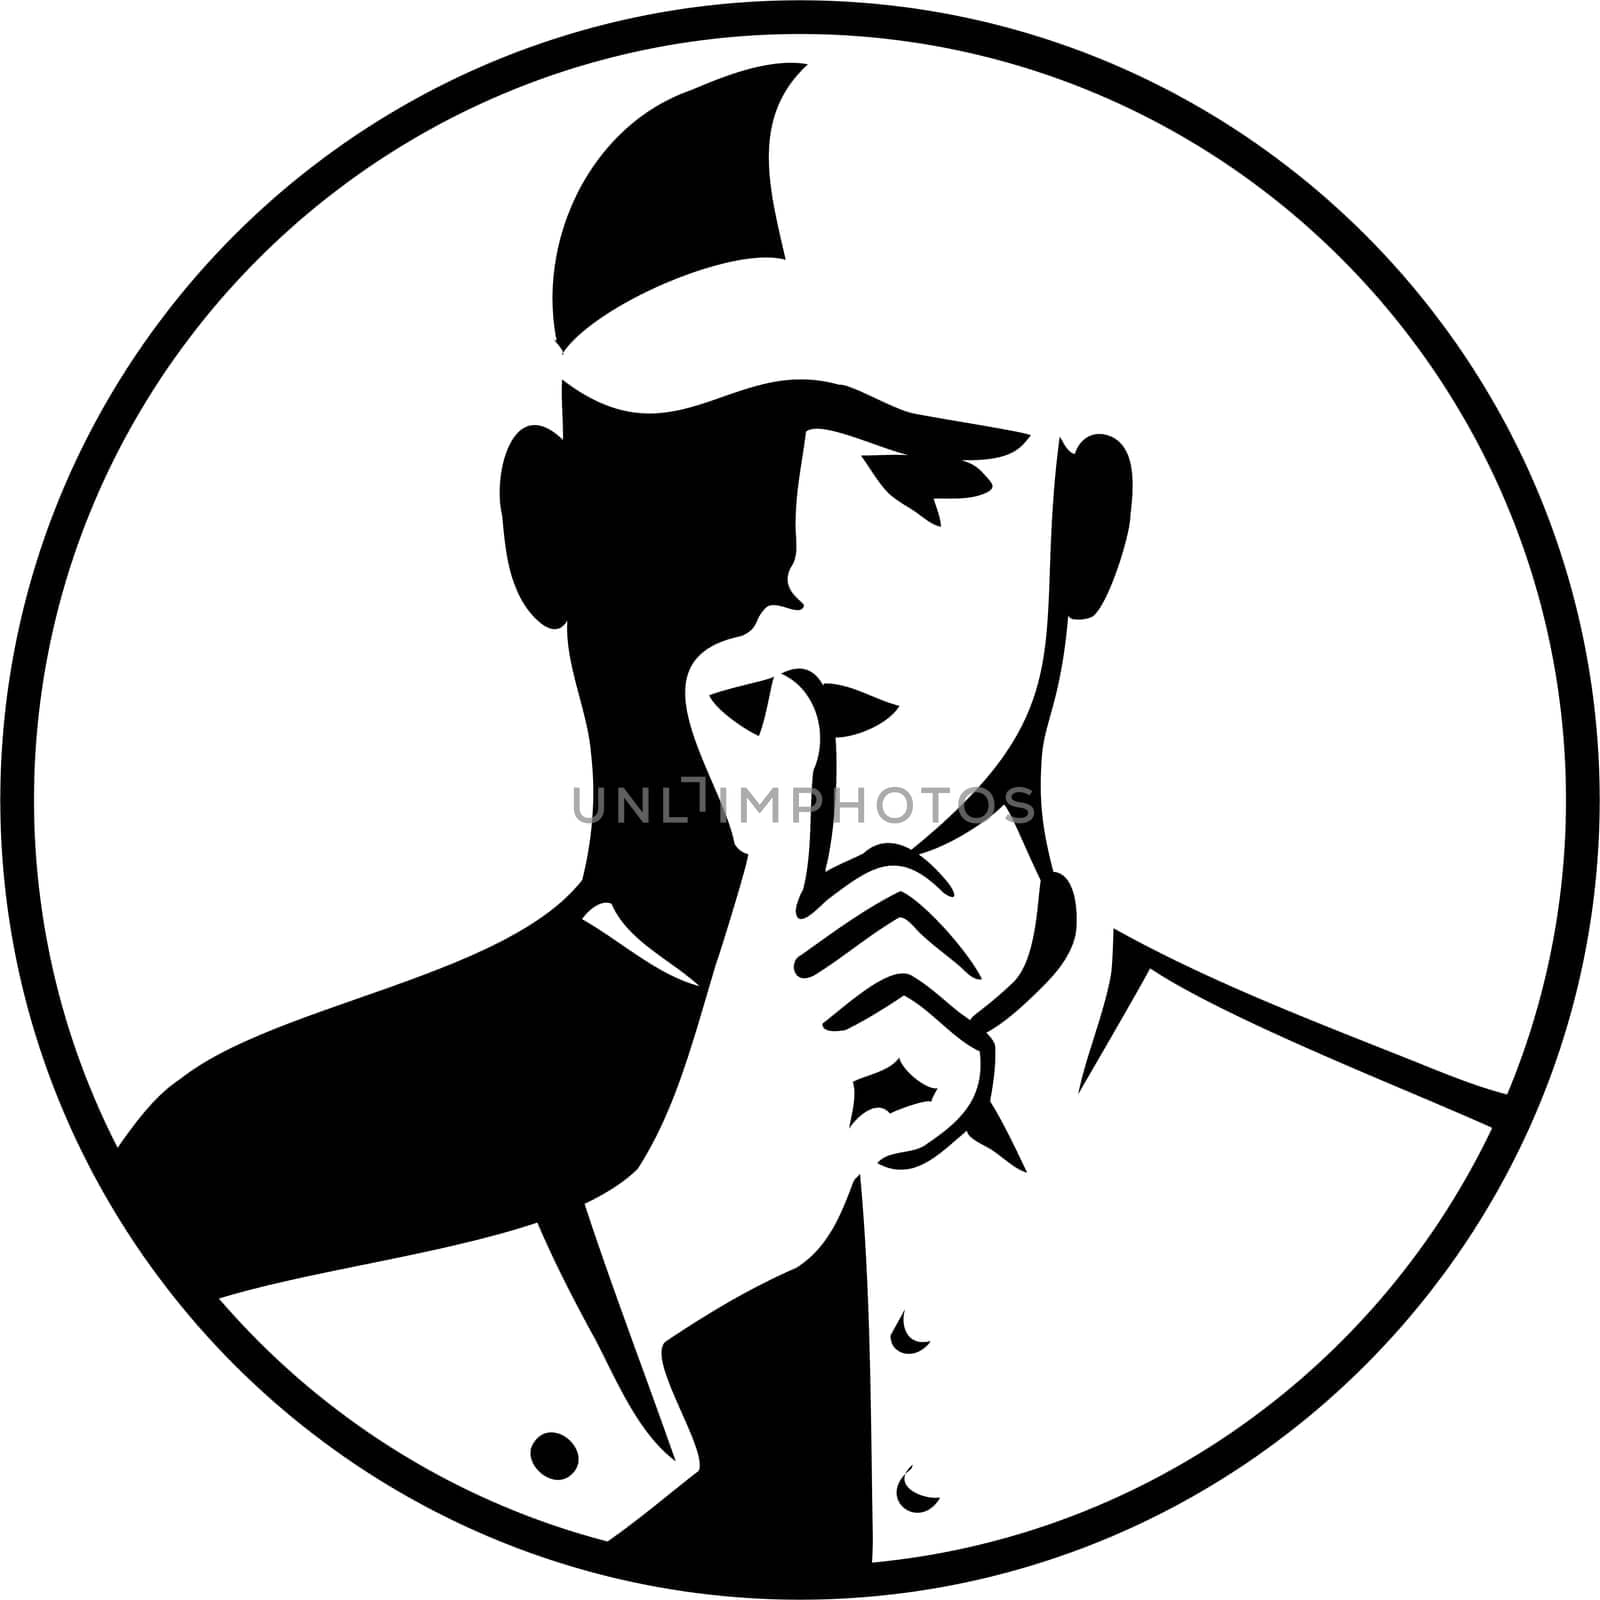 Retro style illustration of a noise control officer with finger on mouth a universal gesture meaning hush, quiet or silence on isolated background done in black and white.
